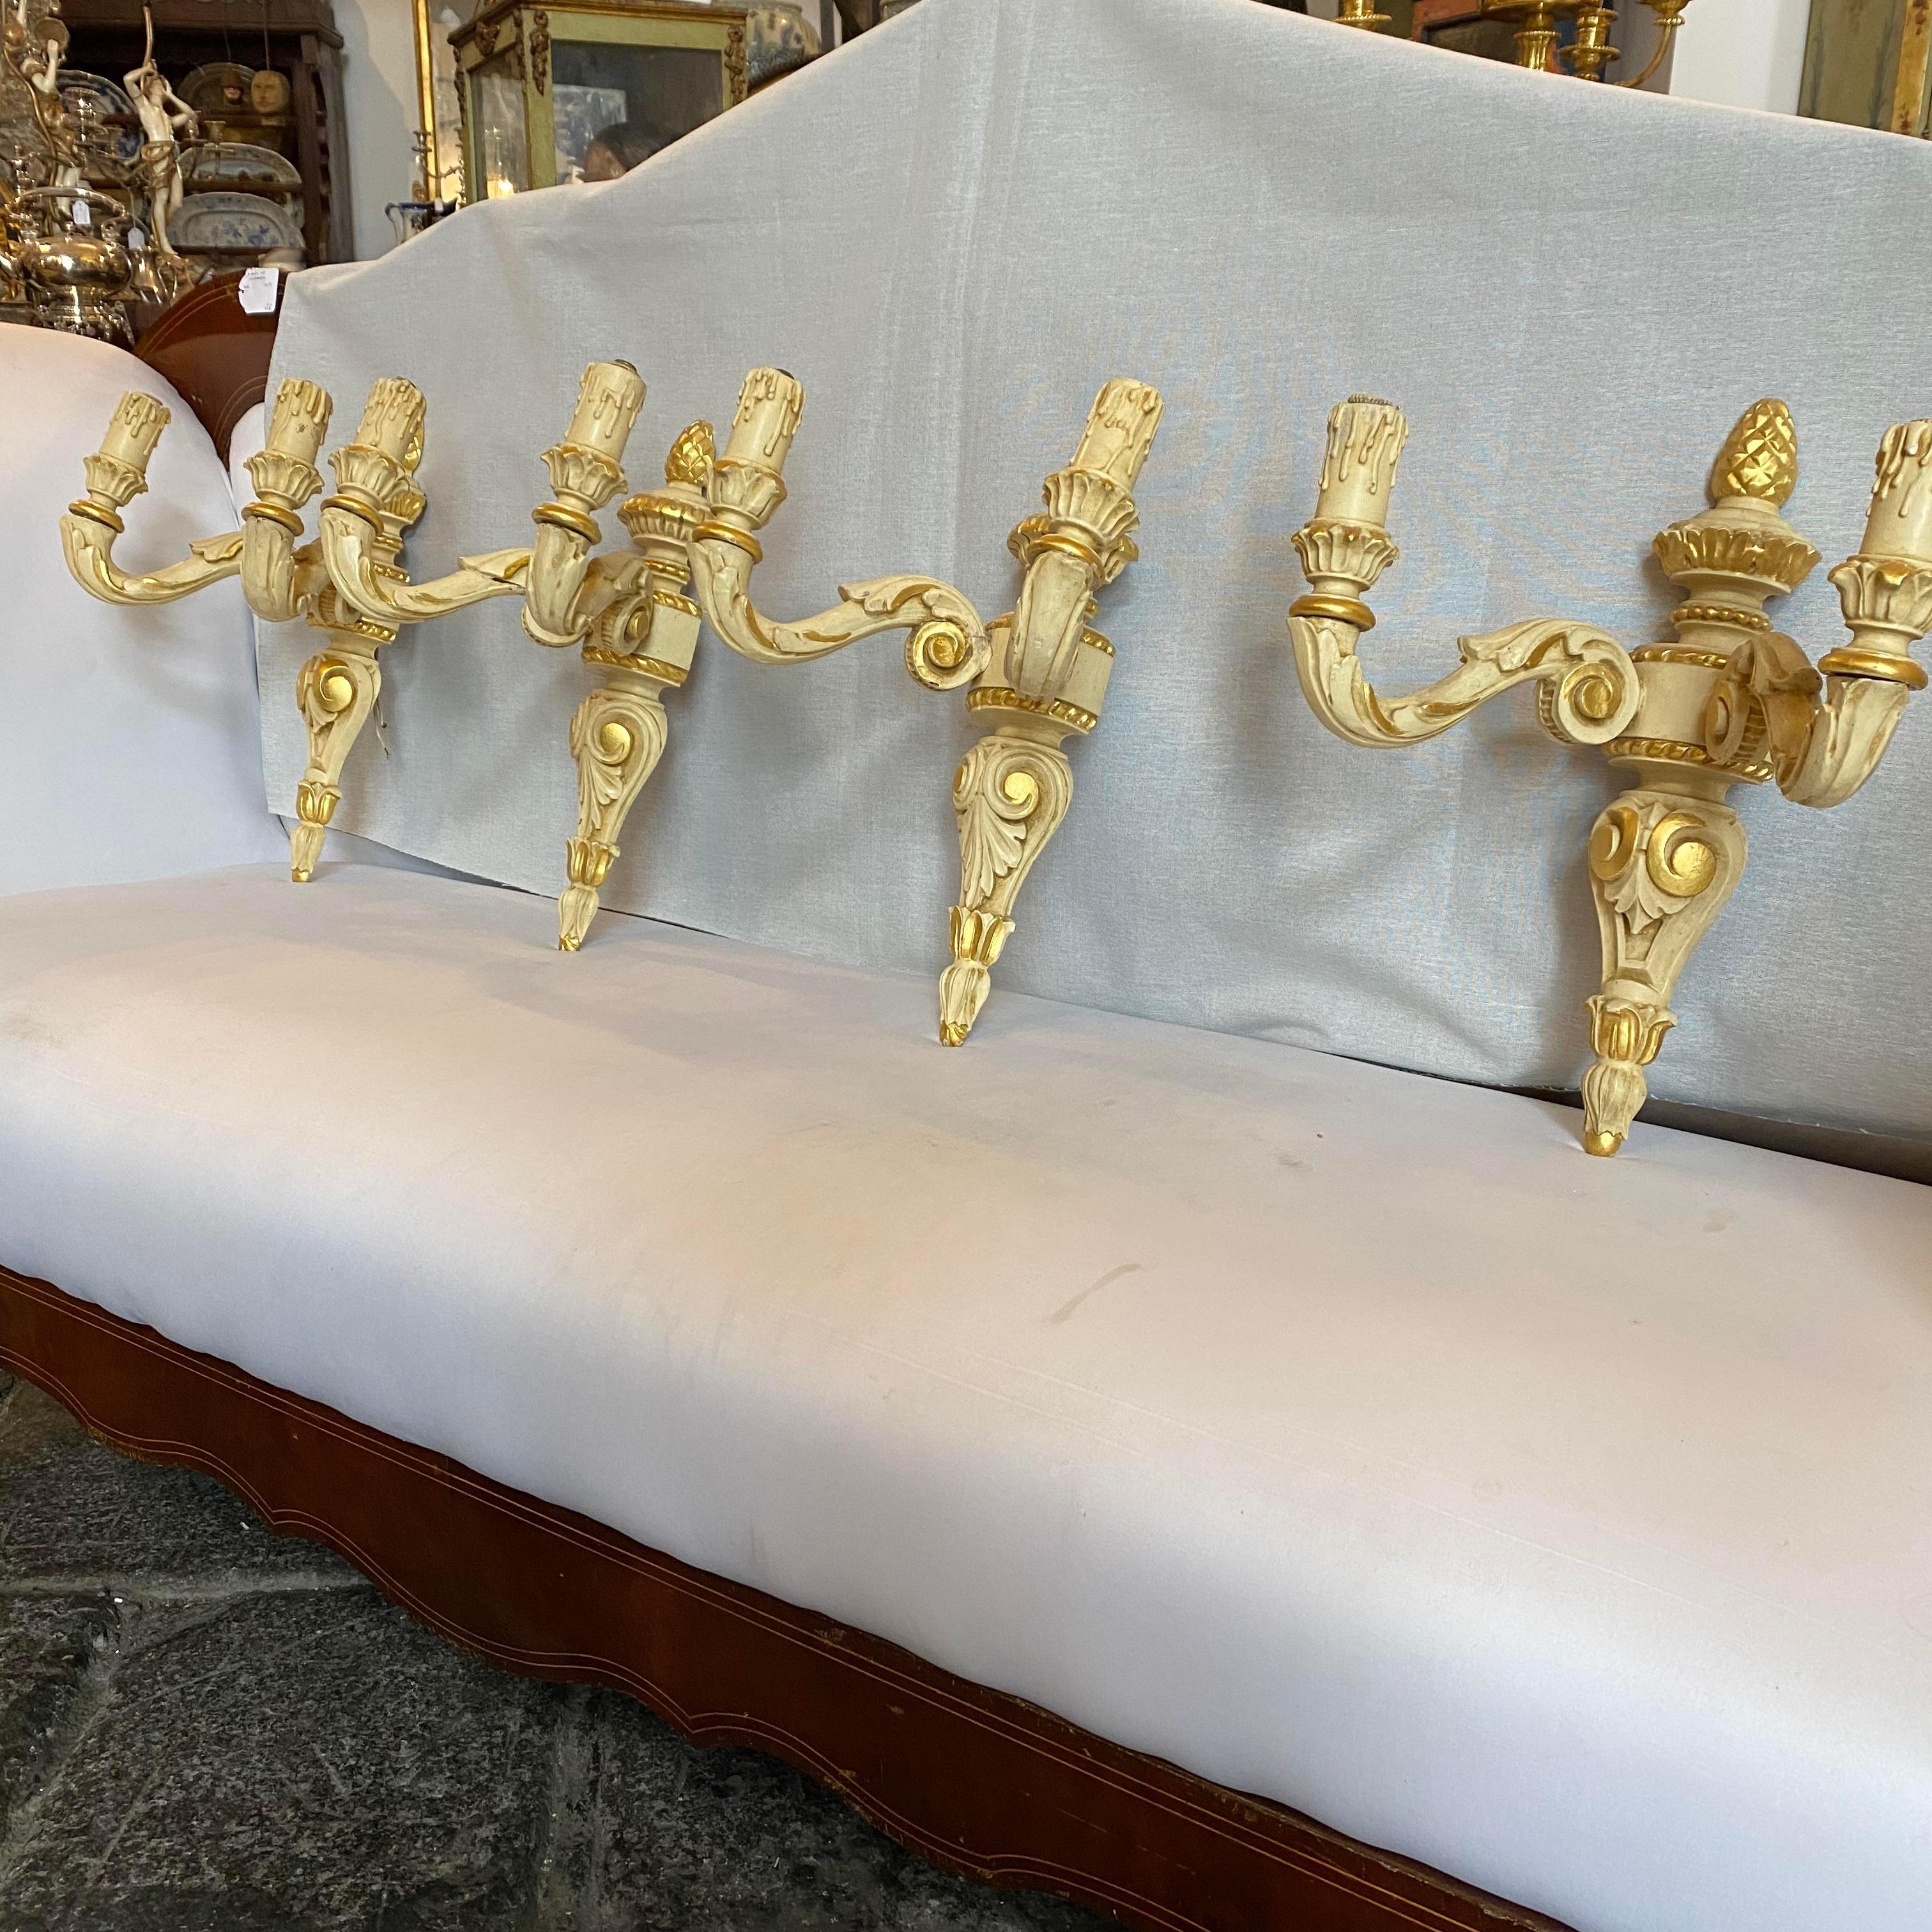 A pair of antique ivory and gold lacquered wood hand-crafted in Italy in the first half of 20th century.